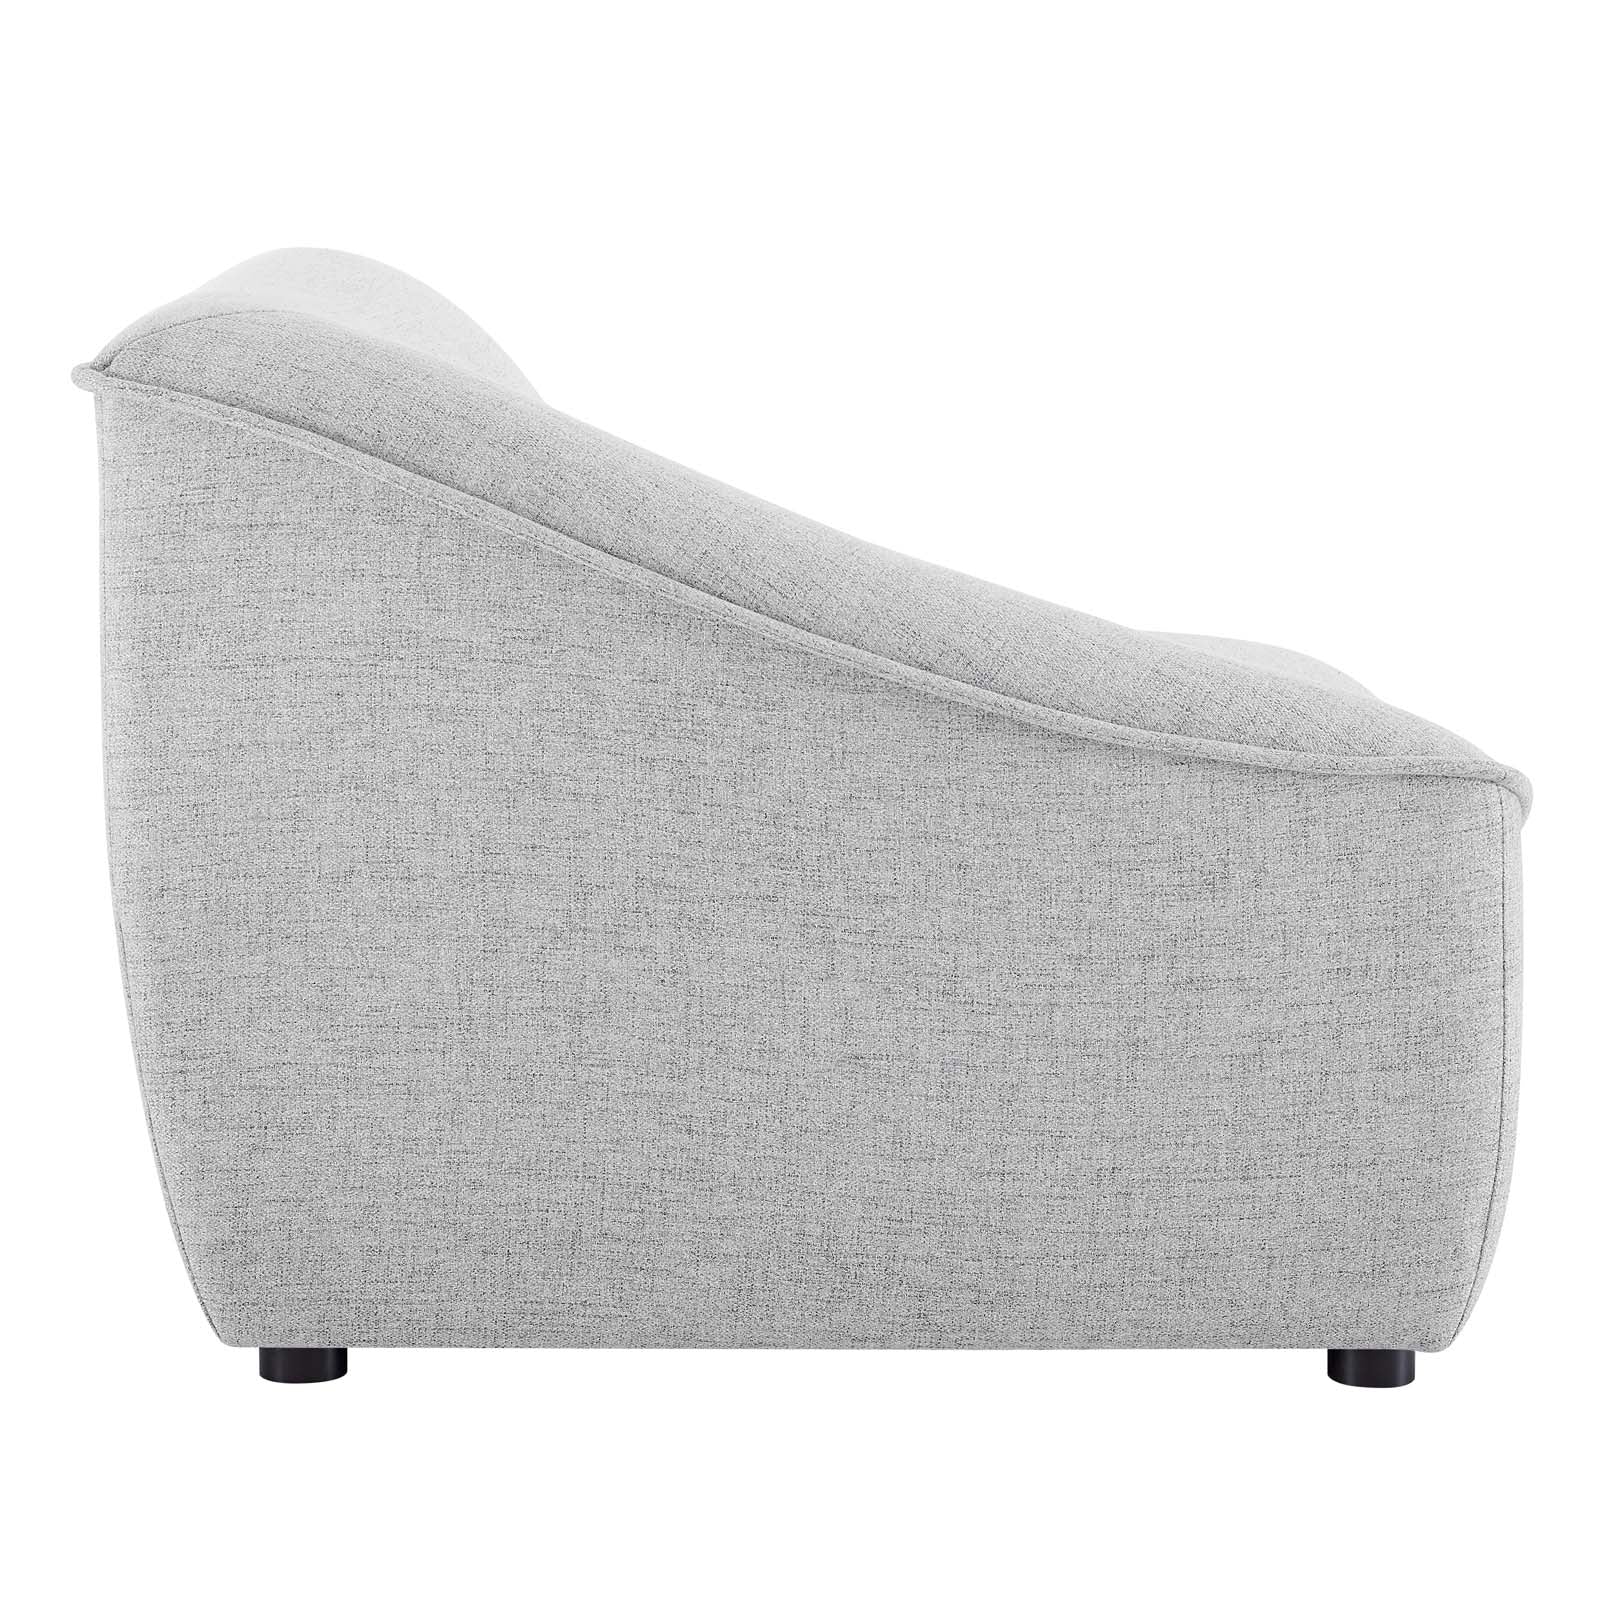 Modway Accent Chairs - Comprise Left-Arm Sectional Sofa Chair Light Gray